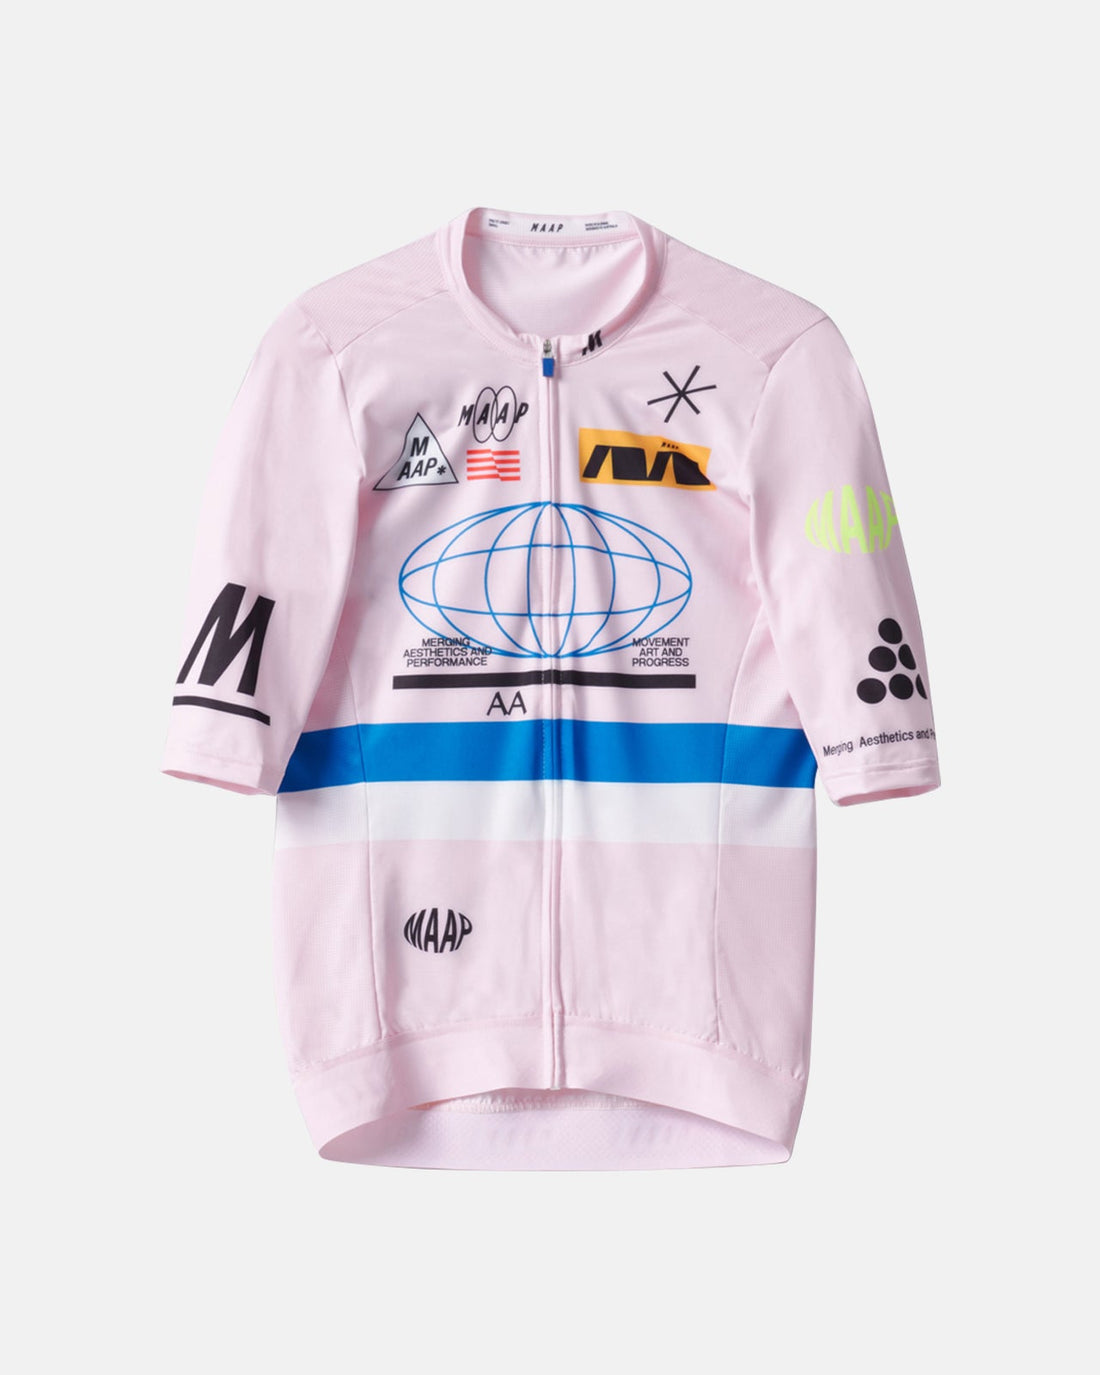 Axis Pro Jersey - Pale Pink - MAAP